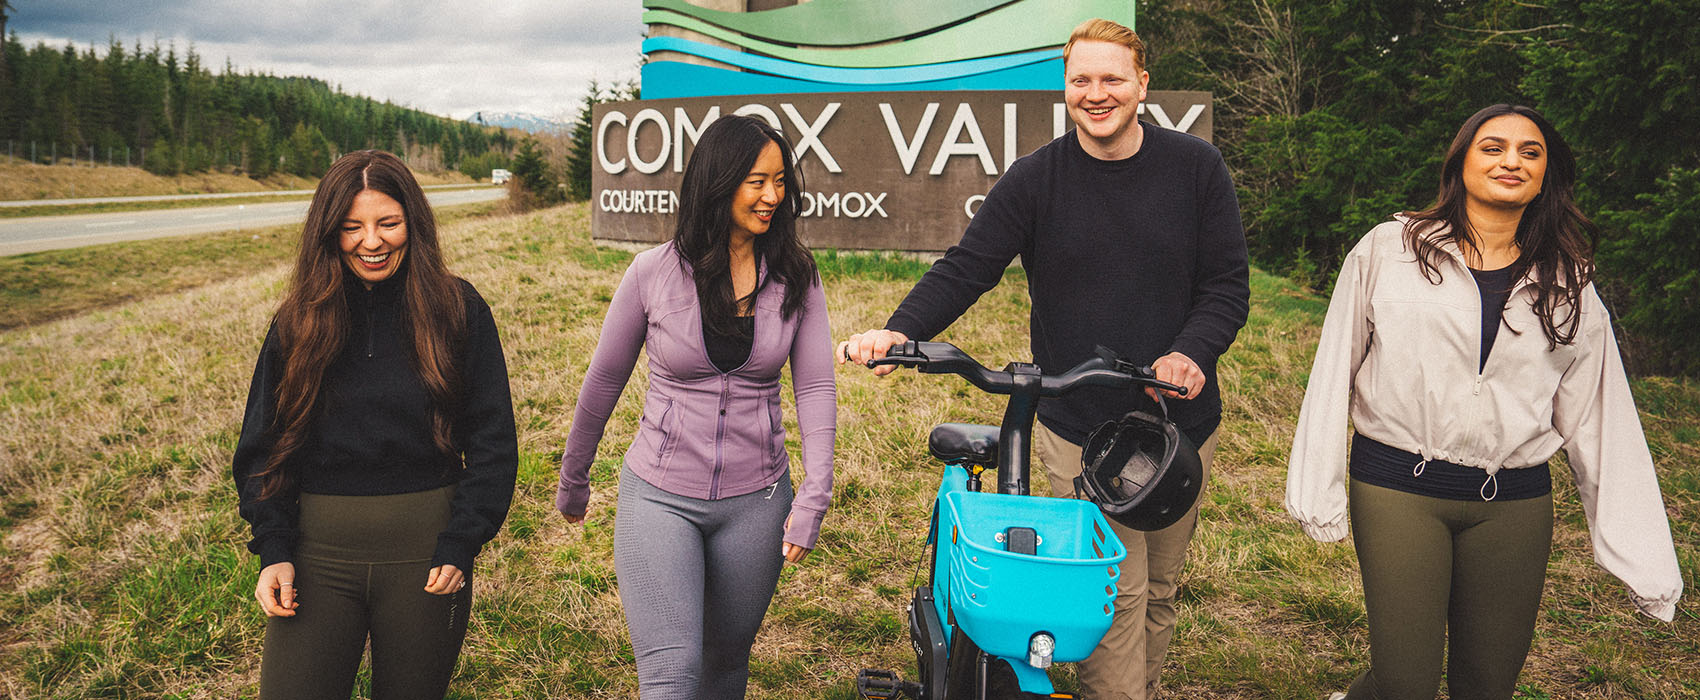 Friends walk with Evolve e-bike in front of the welcome to Comox Valley sign